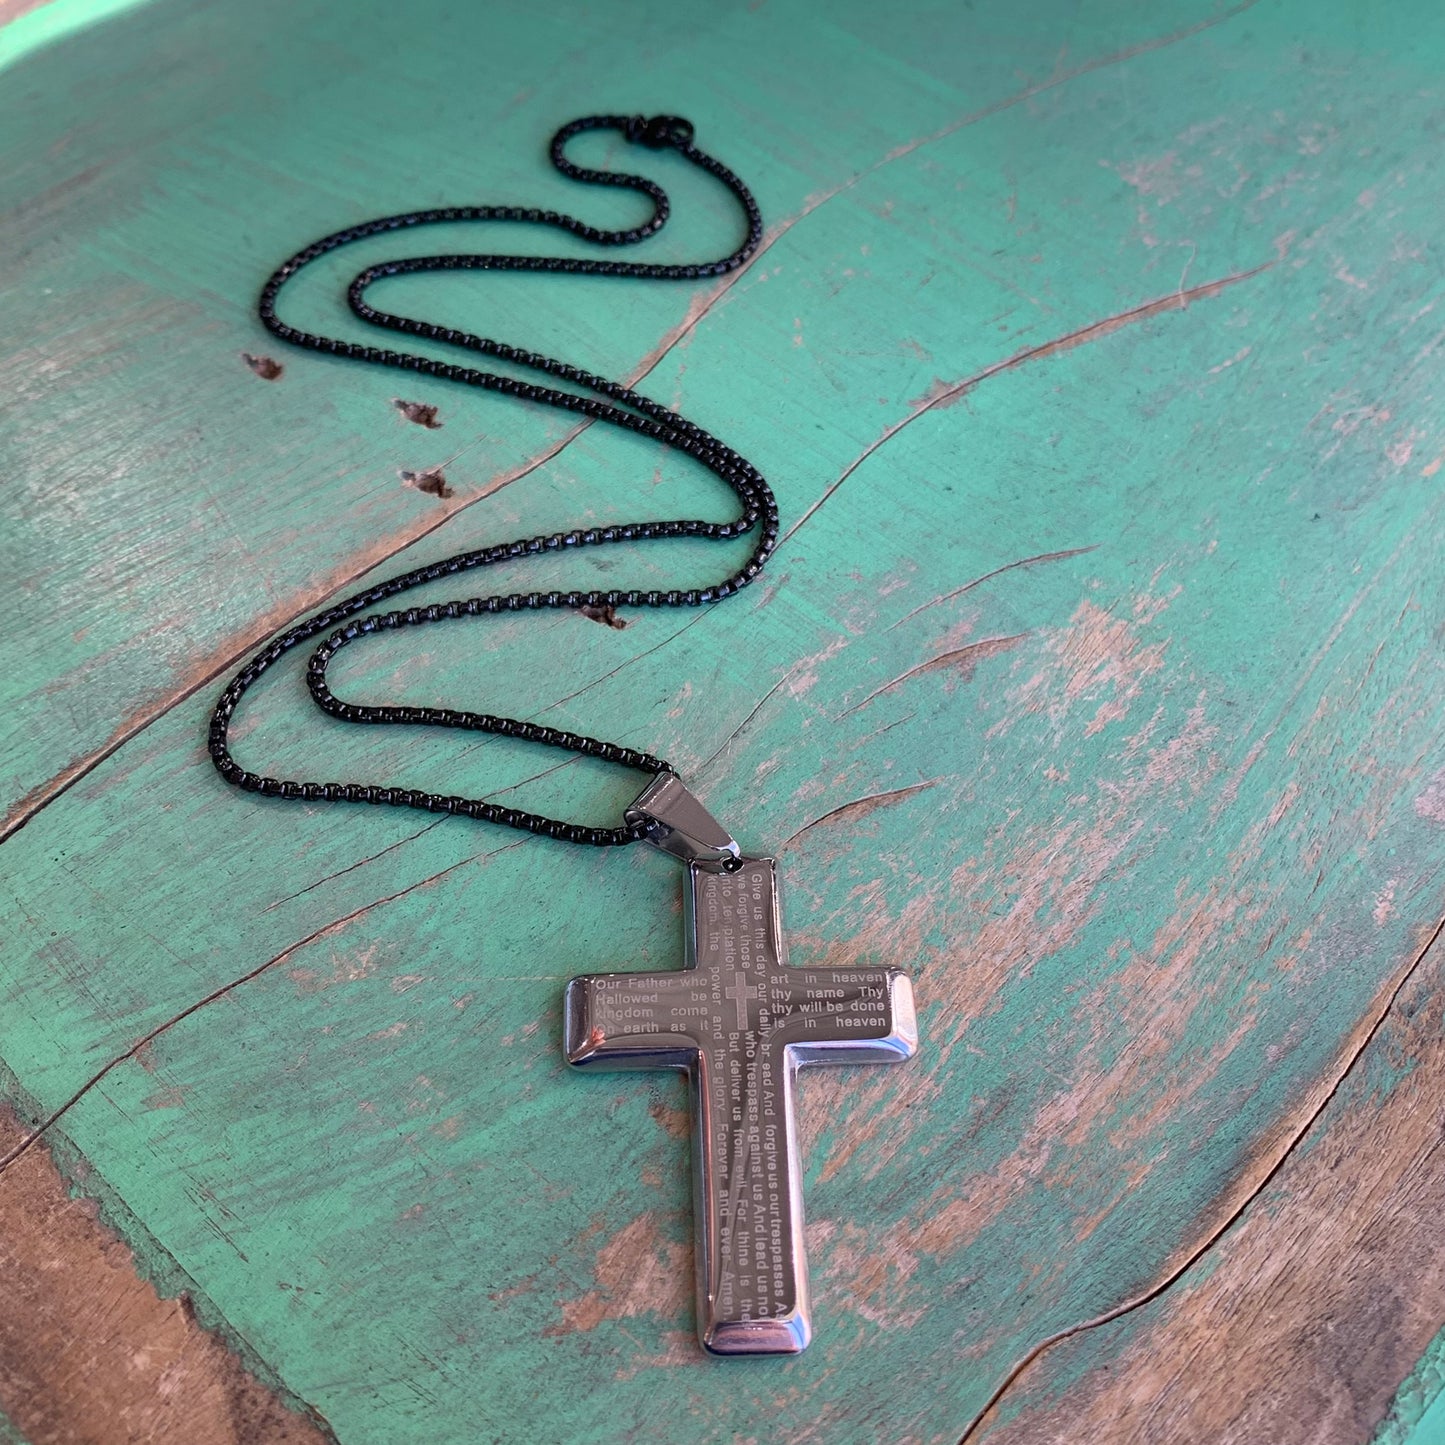 Black Chain with a Silver Cross